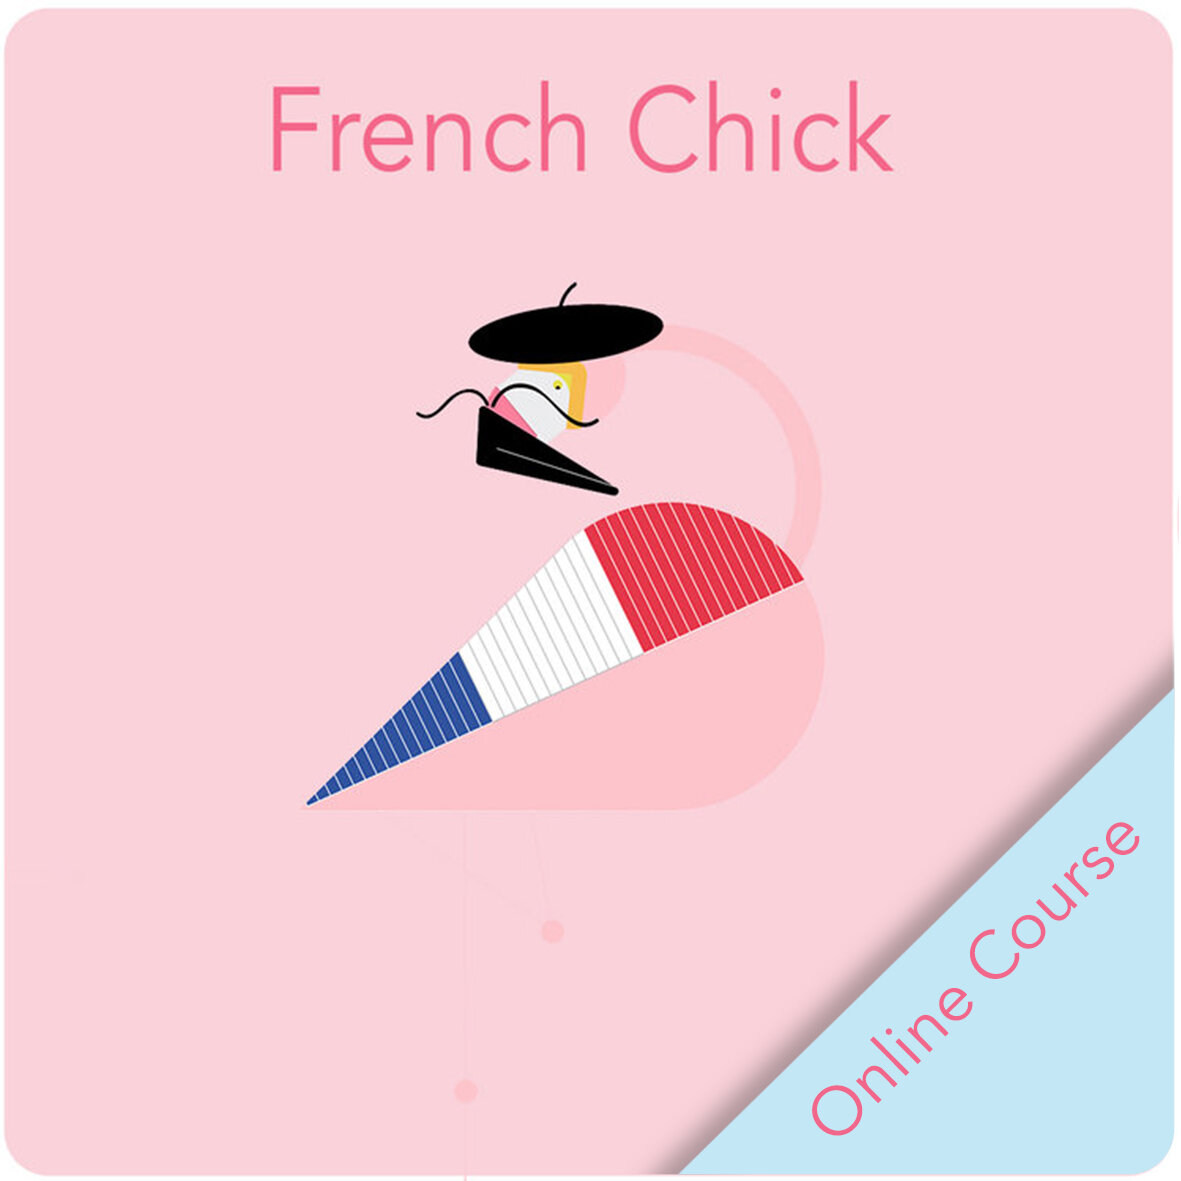 French Chick